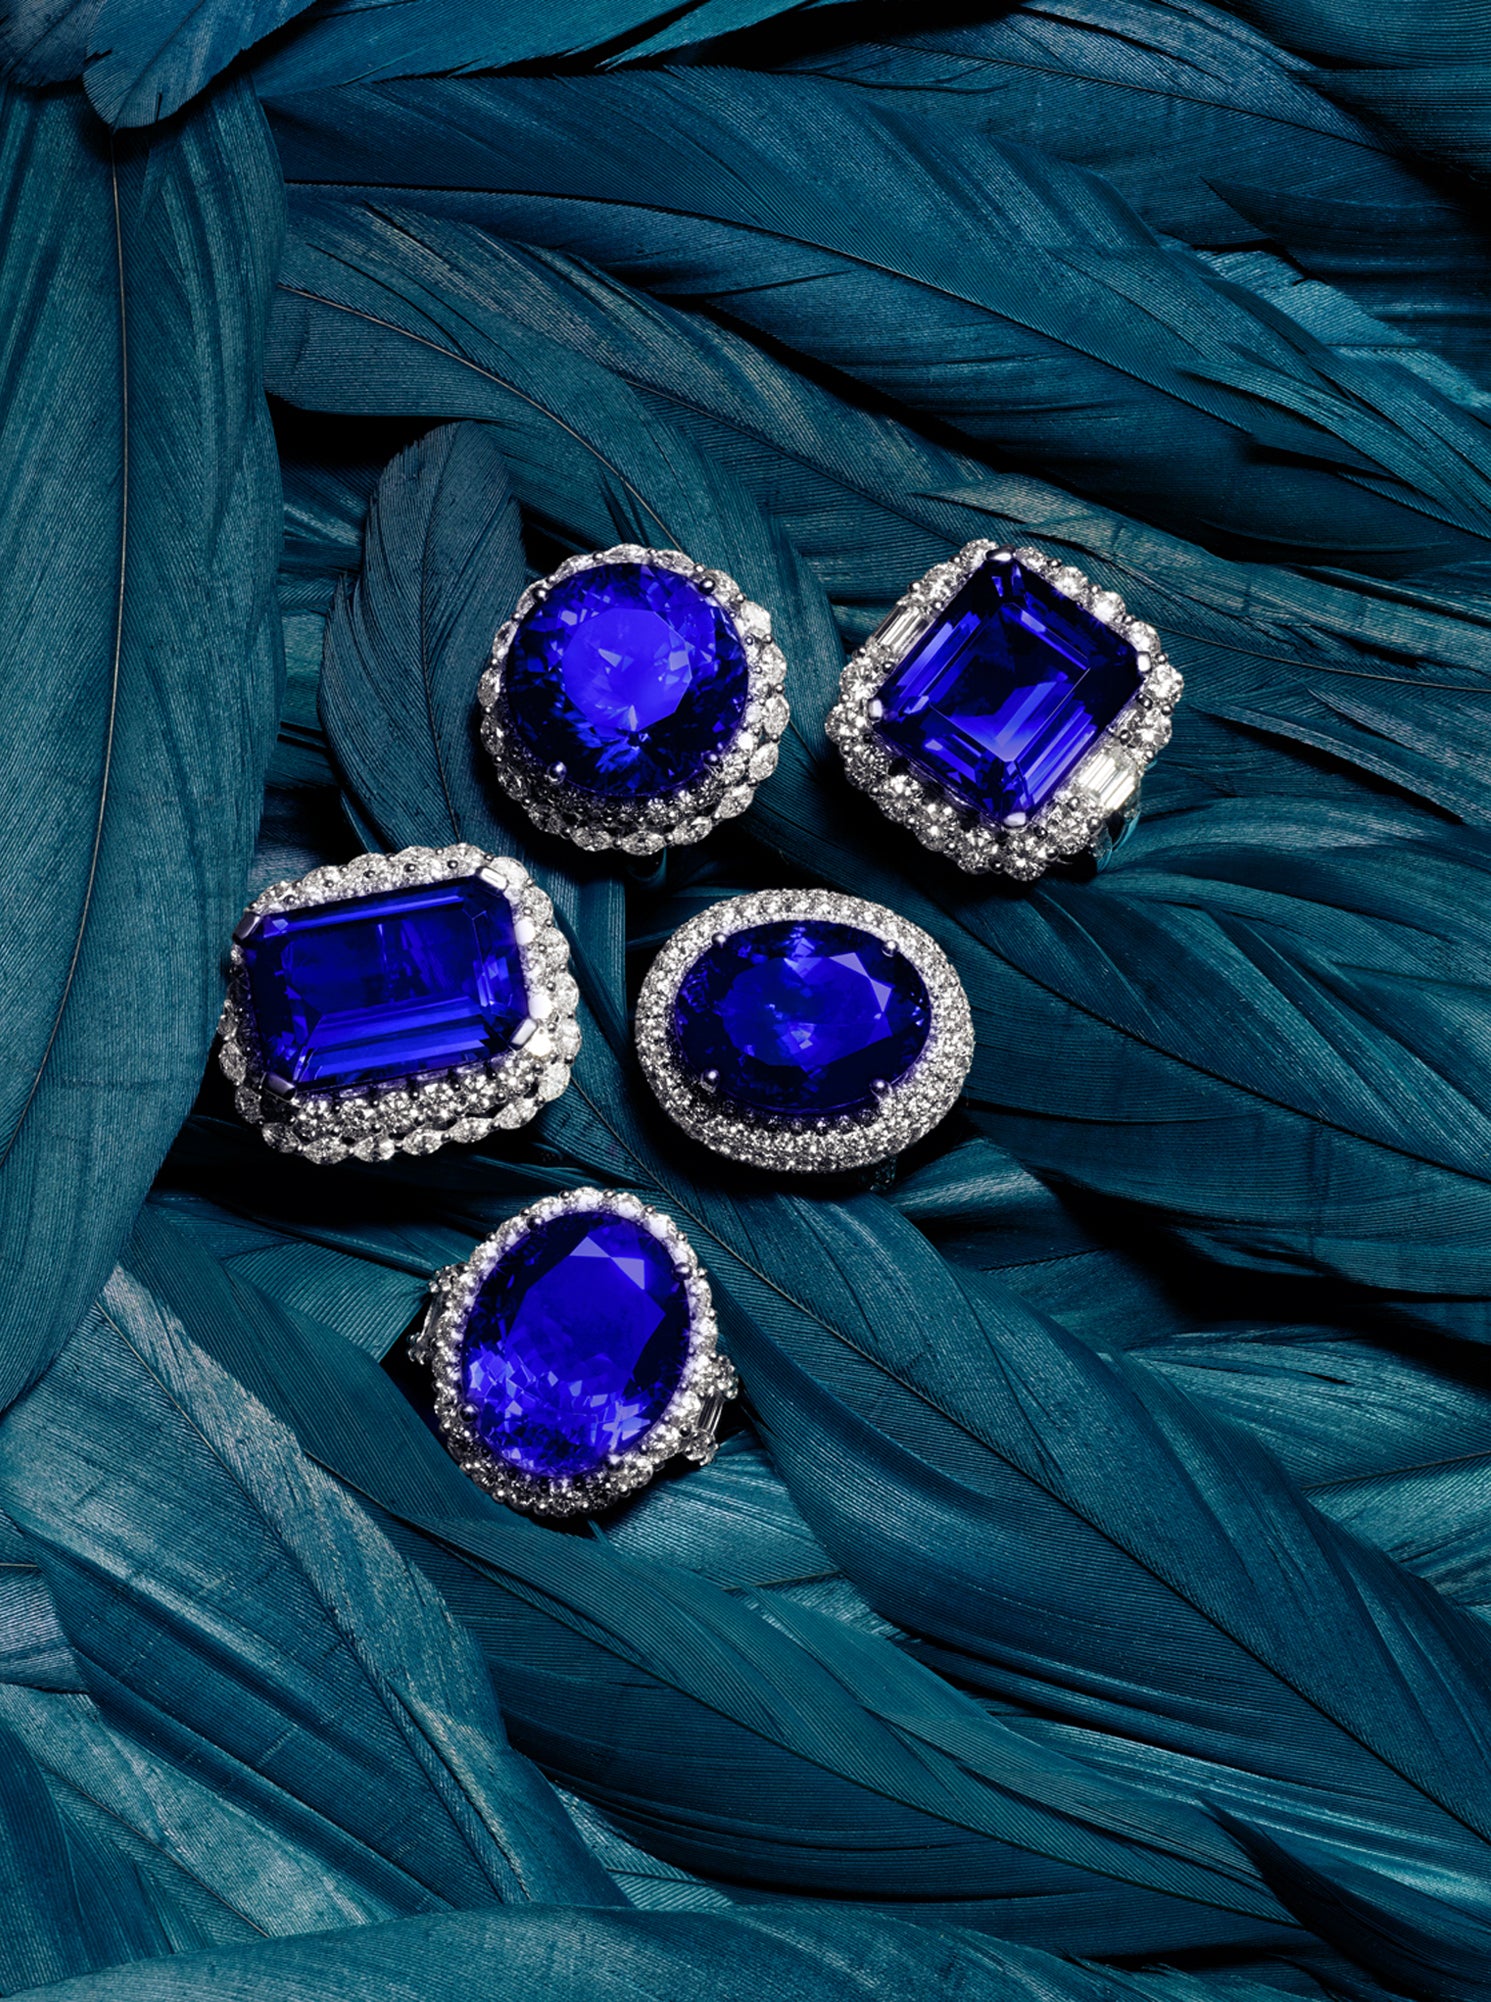 five tanzanite and diamond rings against teal blue feathers